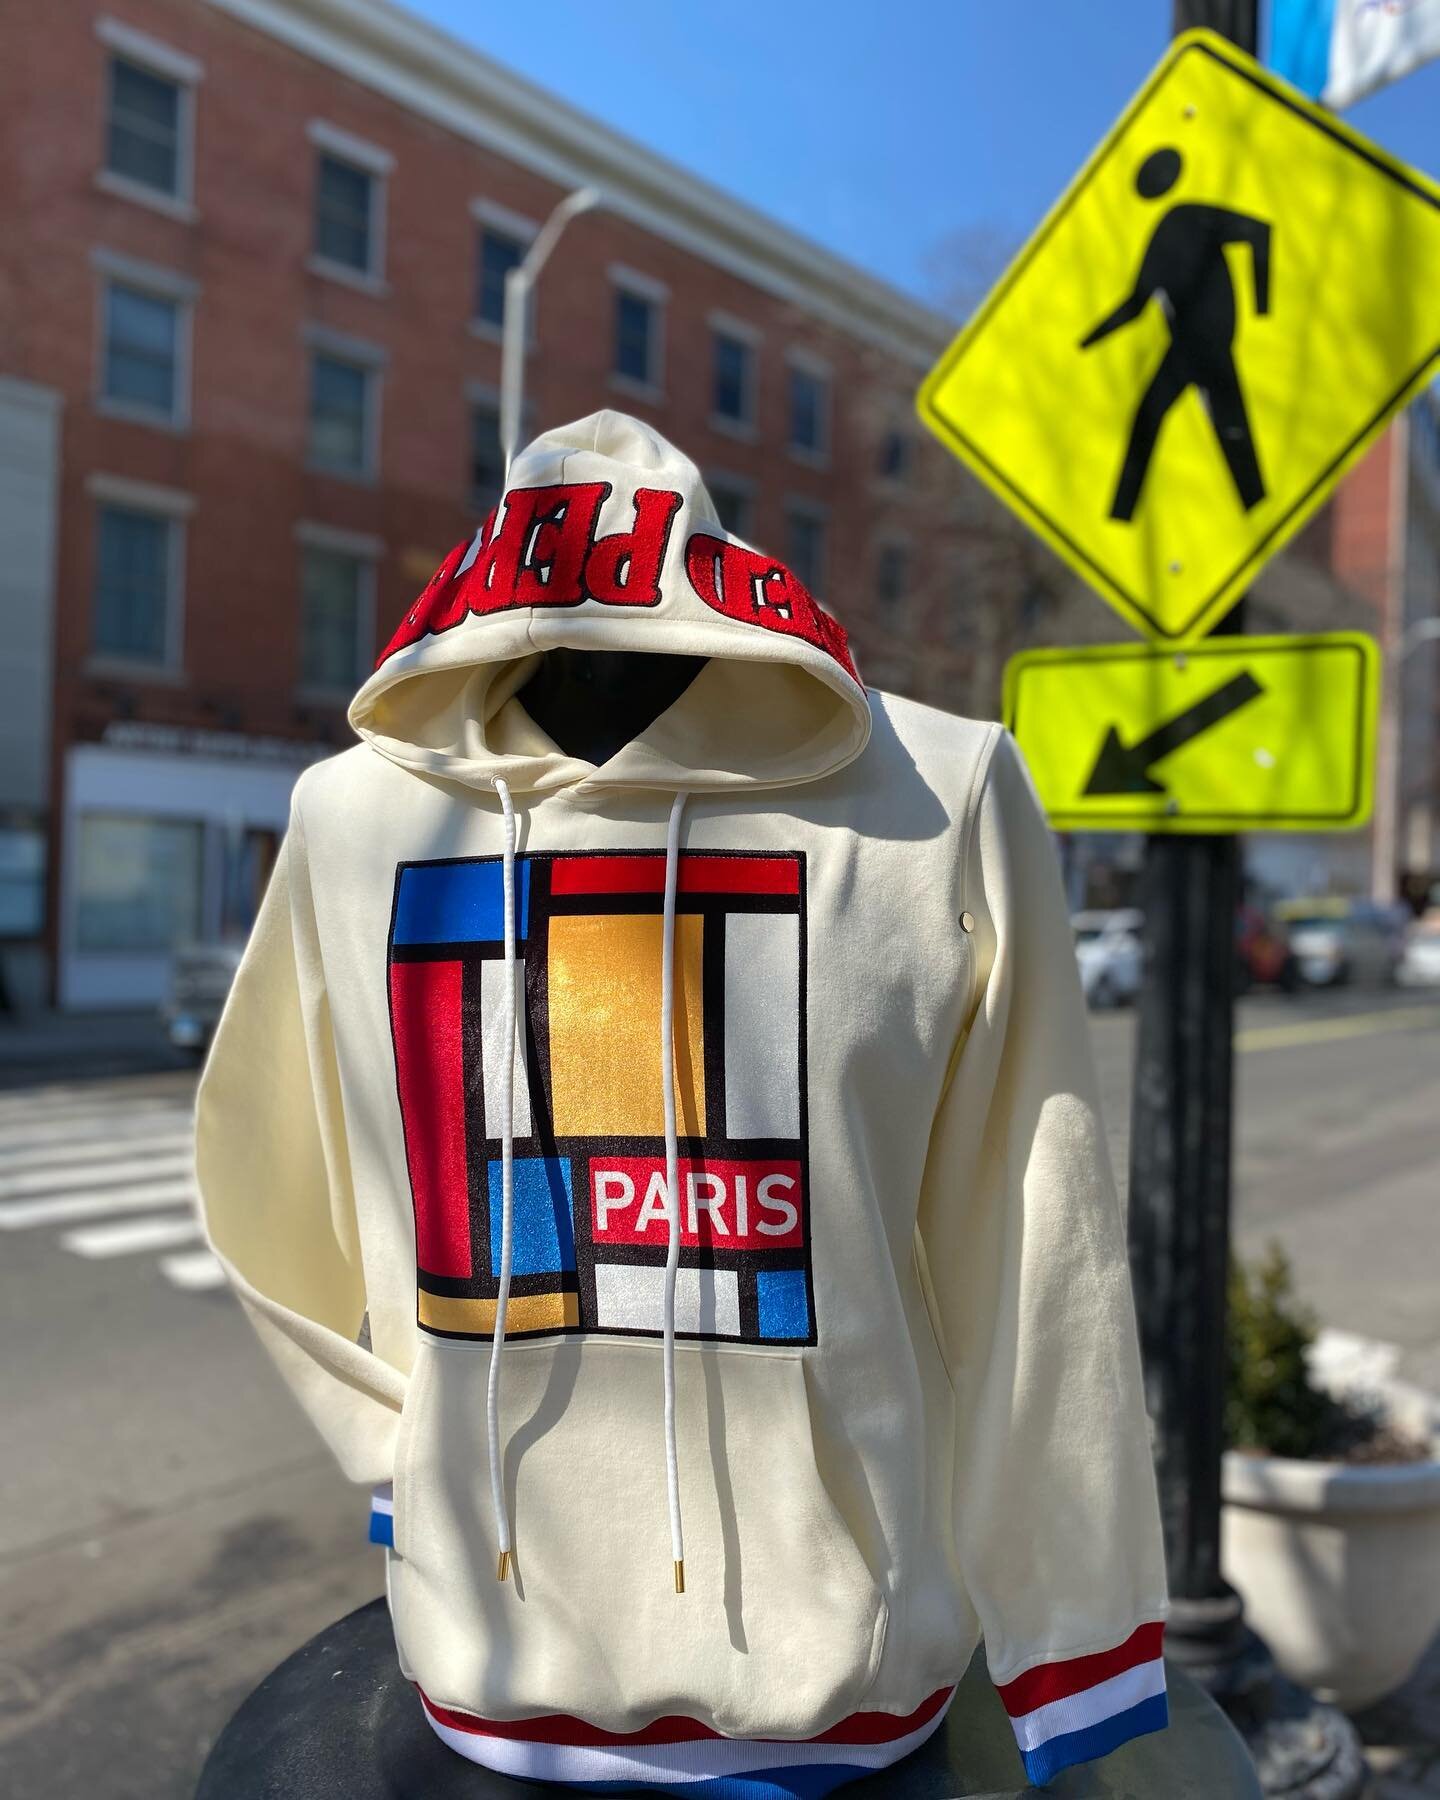 Feel the beautiful day with high quality and stylish Paris Hoody from @stallanddeanofficial #parisredpeppers #streetwearfashion #bridgeport #smallbusiness #jimmys1920 #203 $70